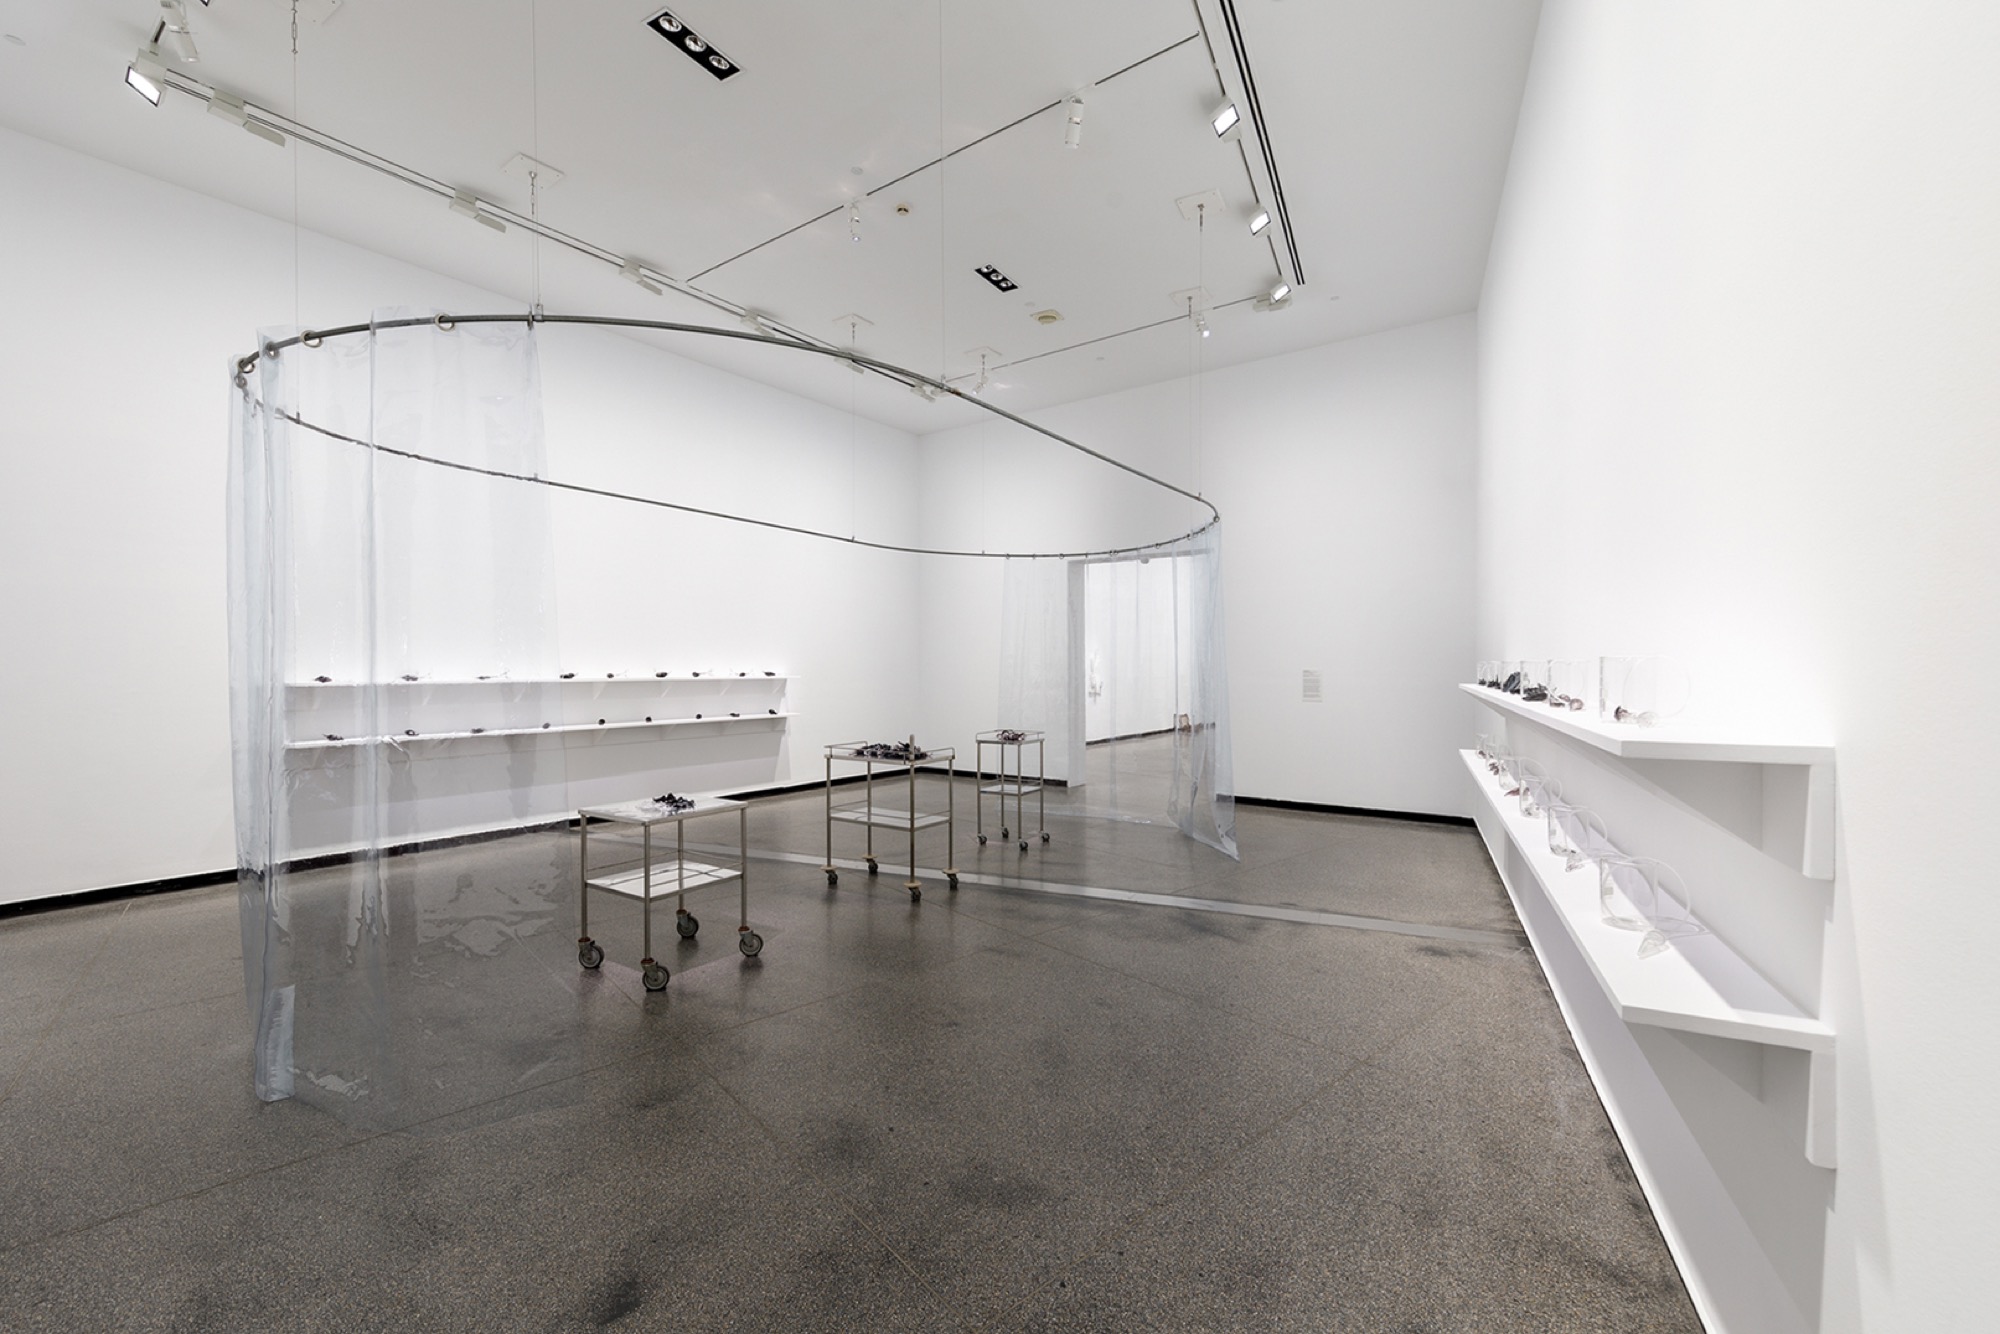 Yhonnie Scarce, <em>Weak in colour but strong in blood</em>, installation view, 2014. Australian Centre for Contemporary Art, Melbourne. Courtesy the artist and THIS IS NO FANTASY, Melbourne. Photo: Andrew Curtis